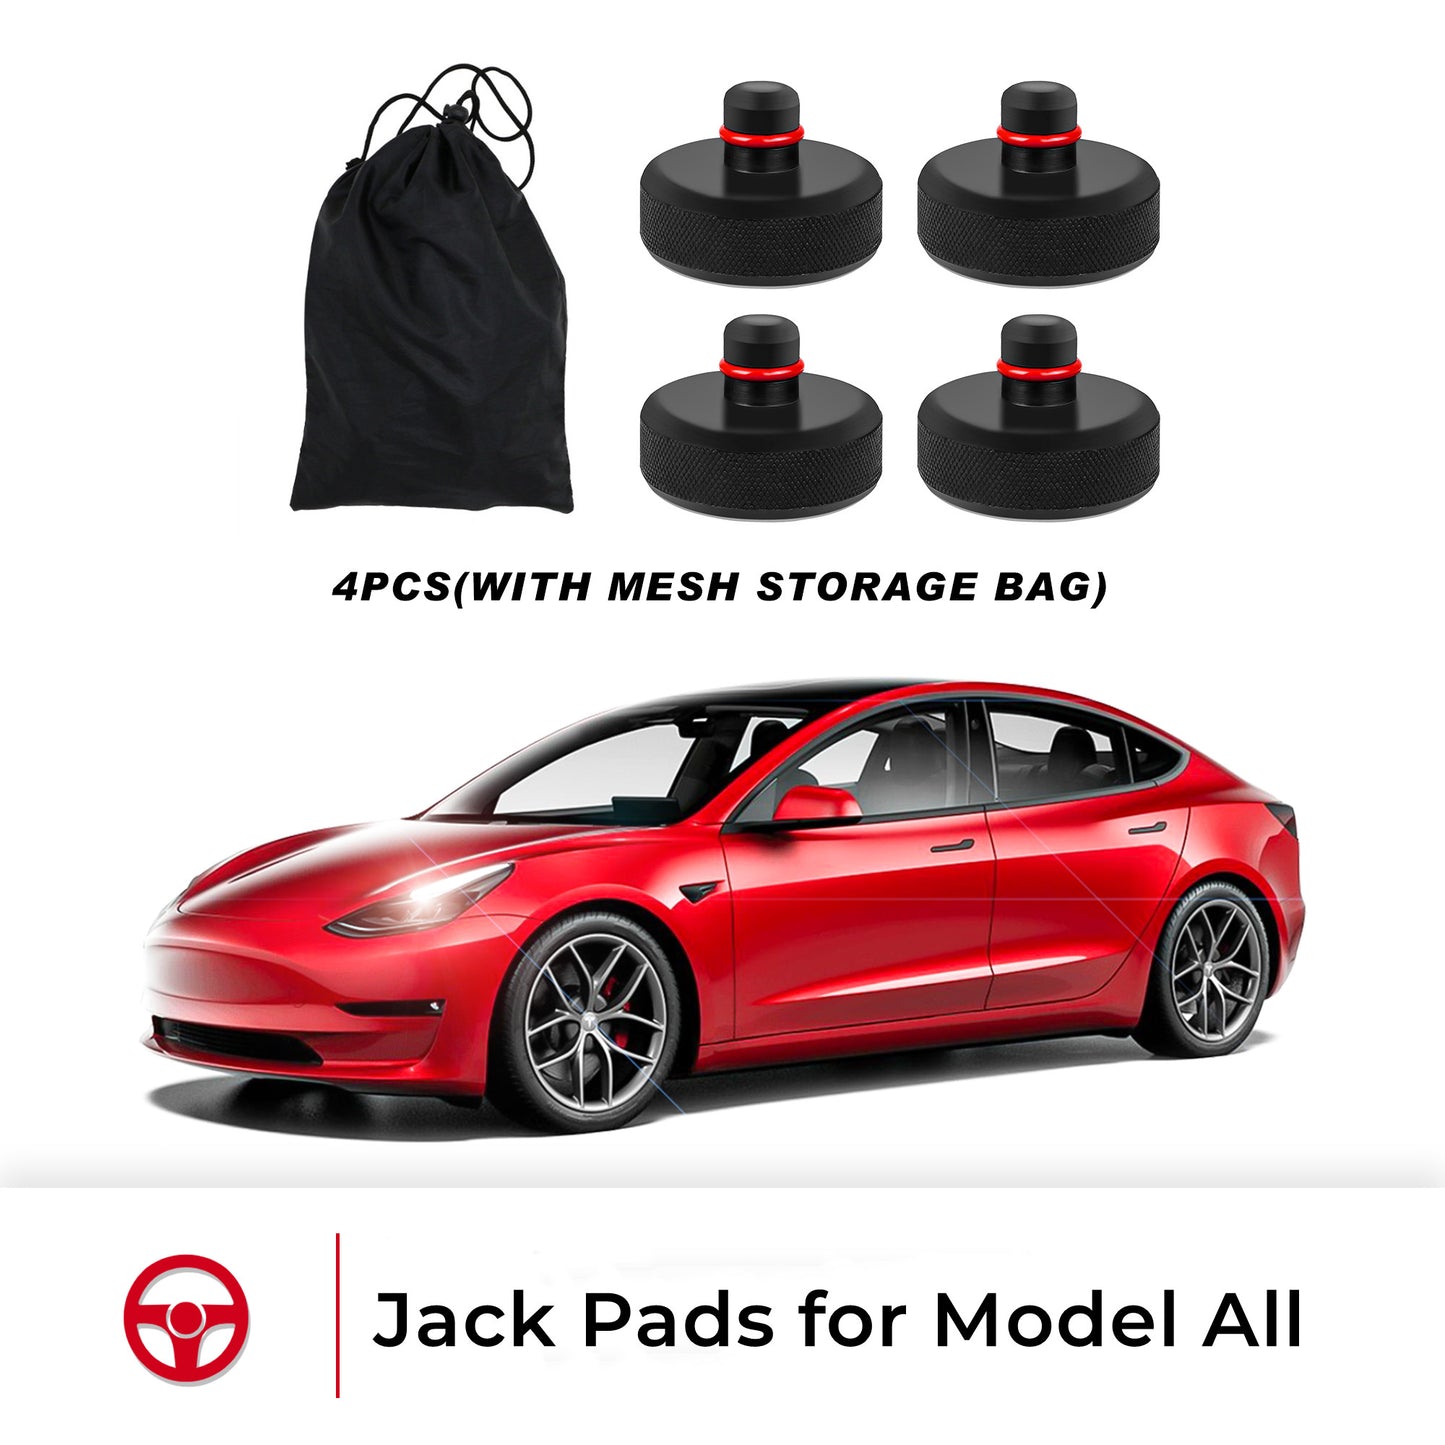 tesla model 3 Y s x jack pad protect protection battery paint adapter lift turn tire car 2022 2023 2021 2020 2019 2018 s3xy arcoche accessories accessory aftermarket price Vehicles standard long range performance sr+ electric car rwd ev interior exterior diy decoration price elon musk must have black white red blue